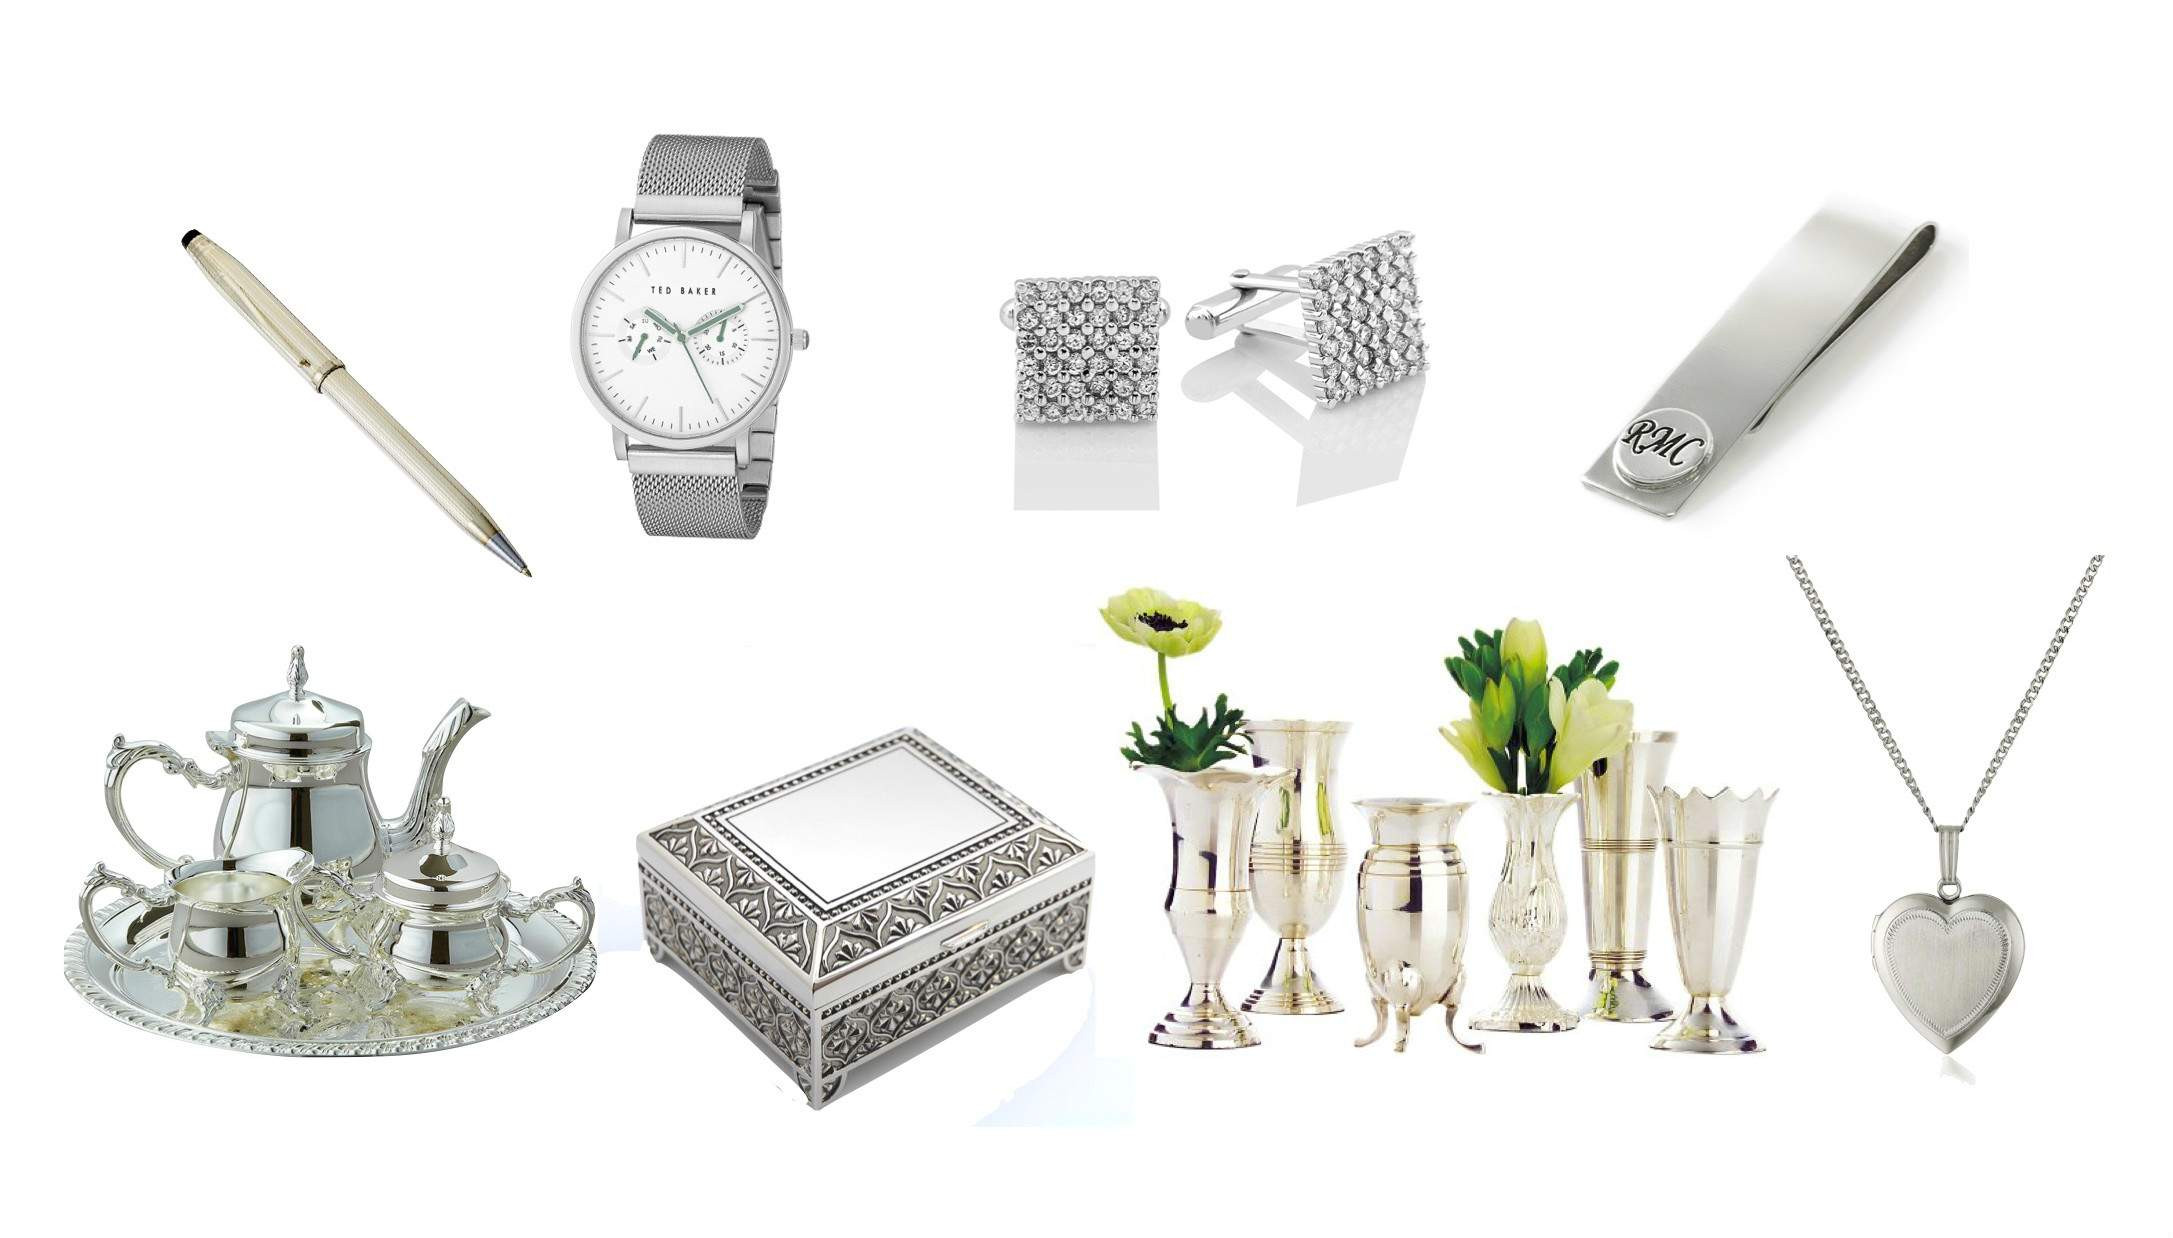 Silver Wedding Gifts
 Top 20 Best 25th Wedding Anniversary Gifts